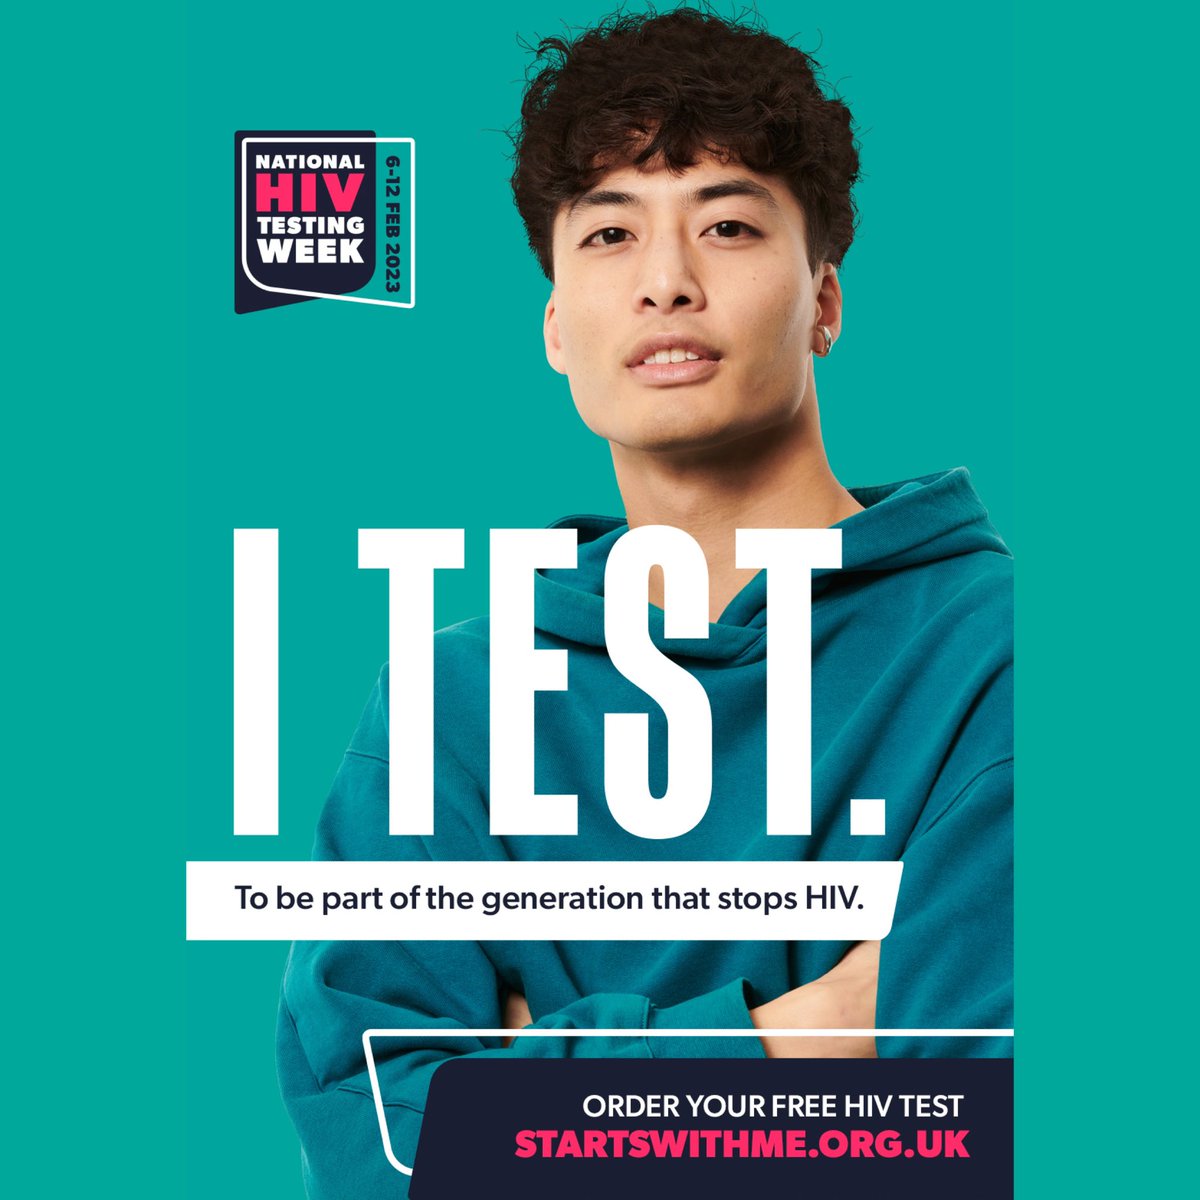 Hey, you! Test this week! I’m so proud to be a face of #NationalHIVTestingWeek this year, and I encourage you to order a kit this week and get tested! startswithme.org.uk @startswith_me @THTorguk #hivtestingweek